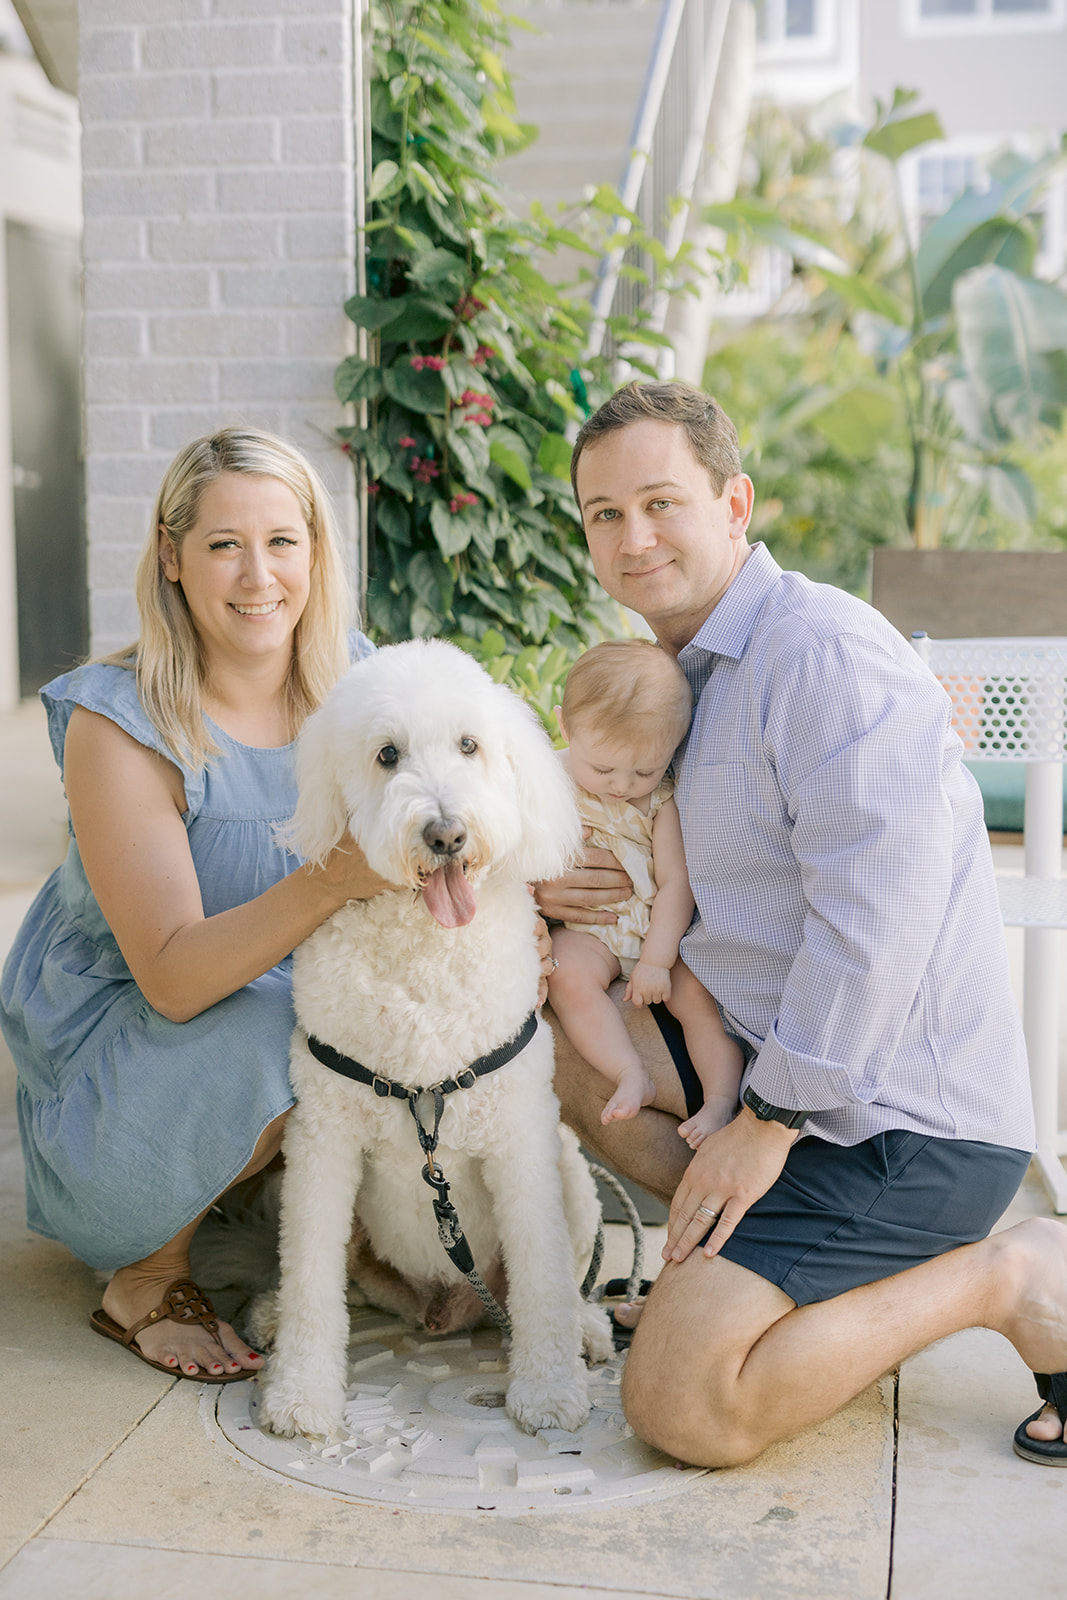 Tampa's must-have family photographer narrates a heartfelt family story.
